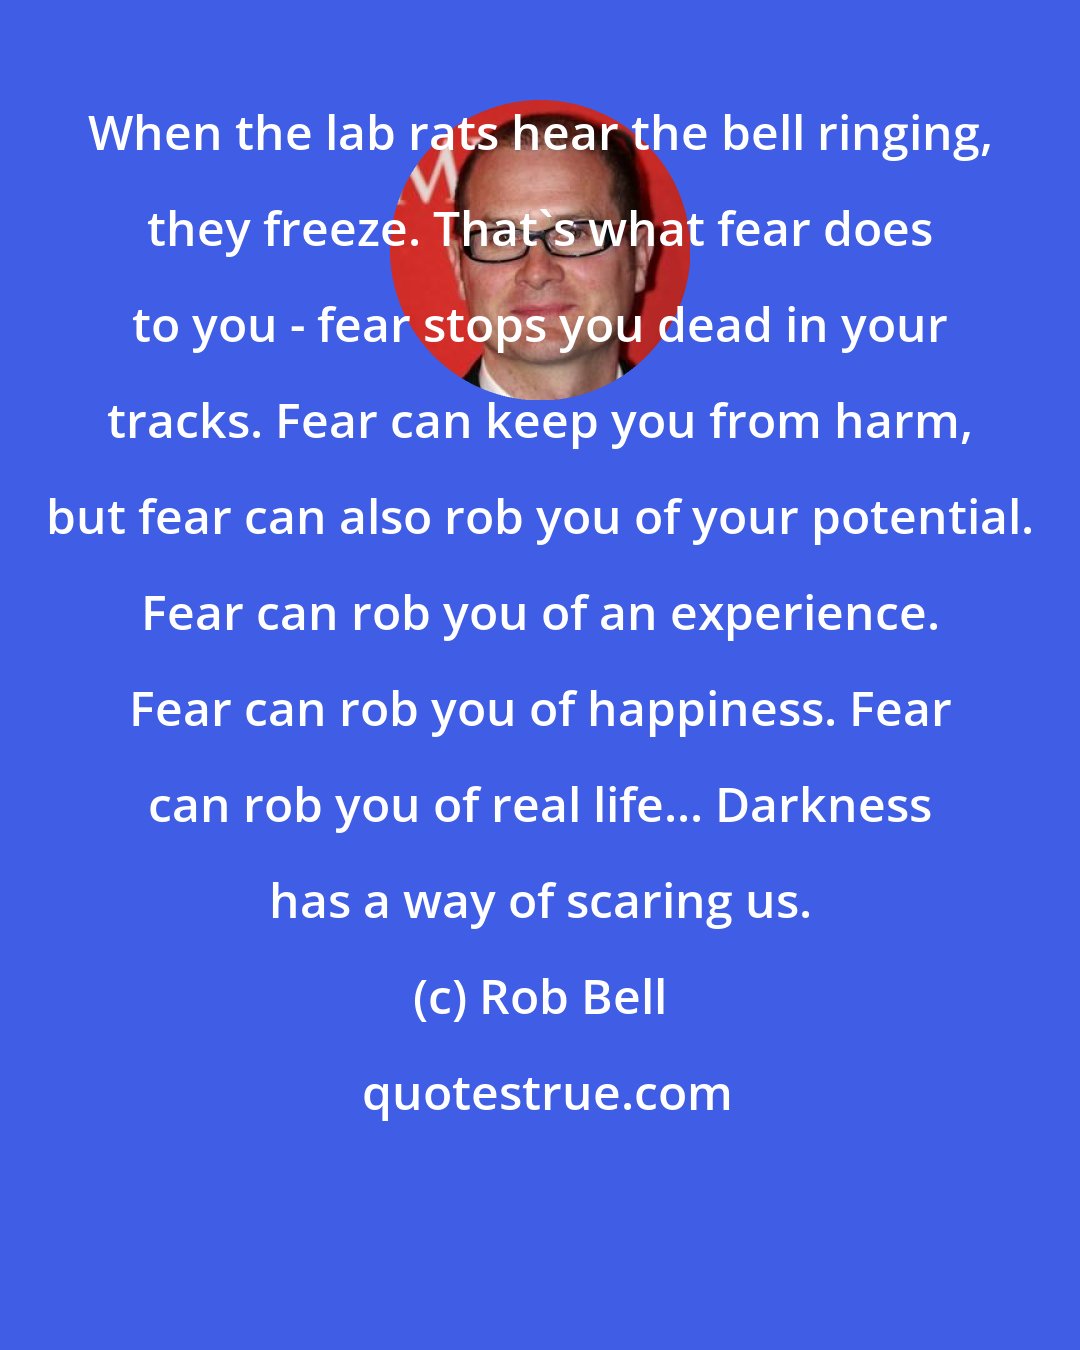 Rob Bell: When the lab rats hear the bell ringing, they freeze. That's what fear does to you - fear stops you dead in your tracks. Fear can keep you from harm, but fear can also rob you of your potential. Fear can rob you of an experience. Fear can rob you of happiness. Fear can rob you of real life... Darkness has a way of scaring us.